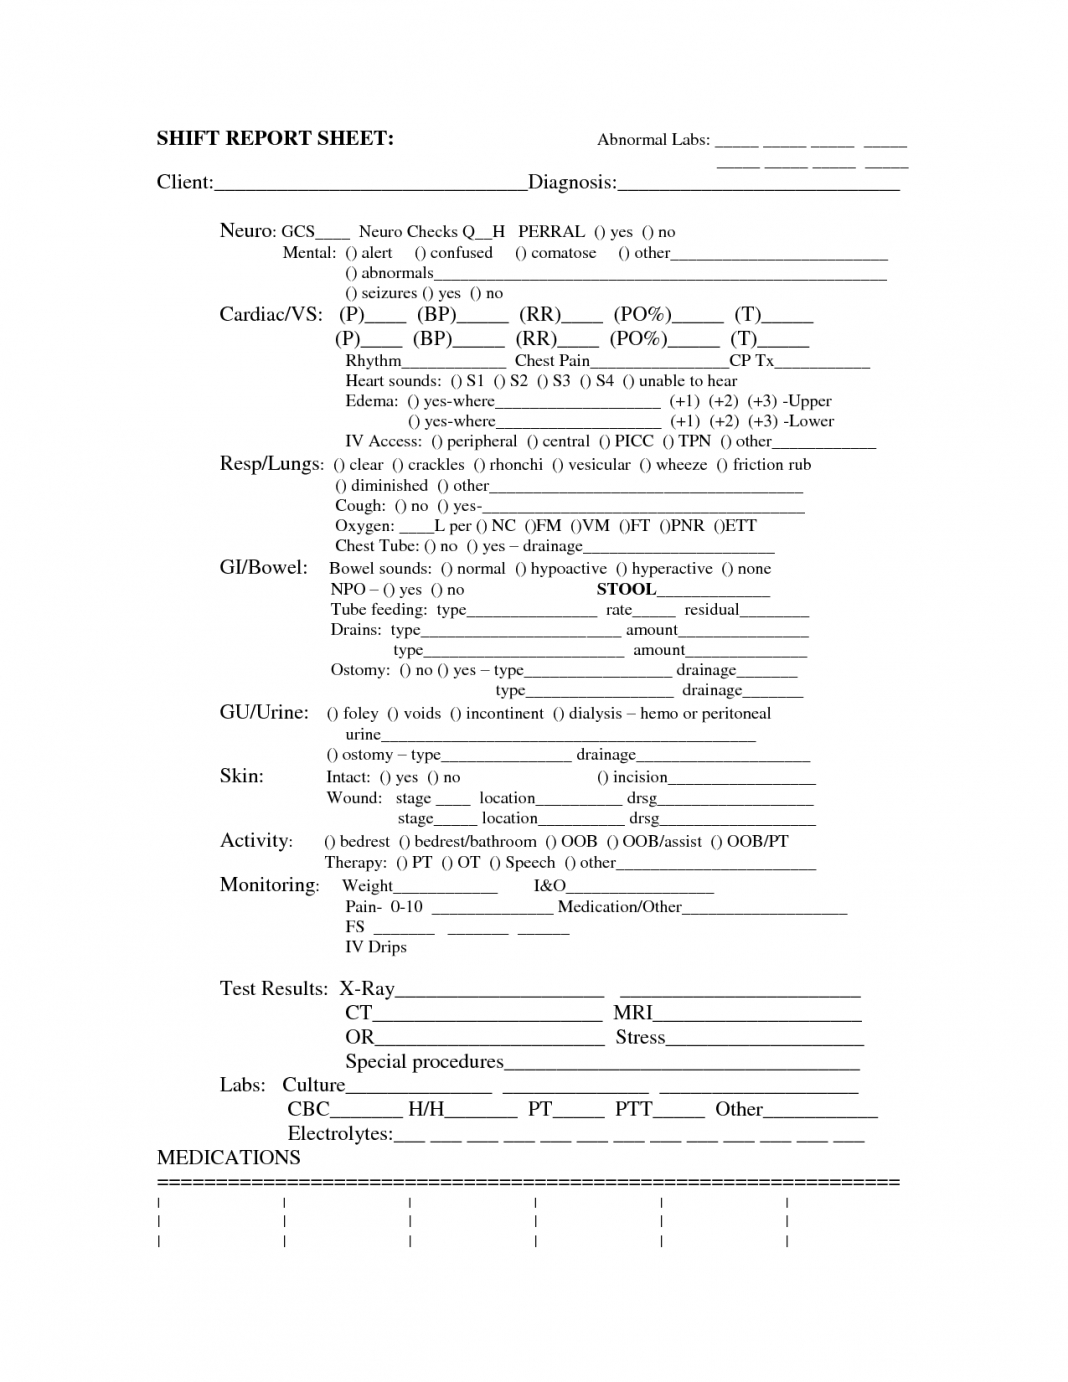 Shift Report Template Examples Restaurant Nursing With Nursing Shift Report Template